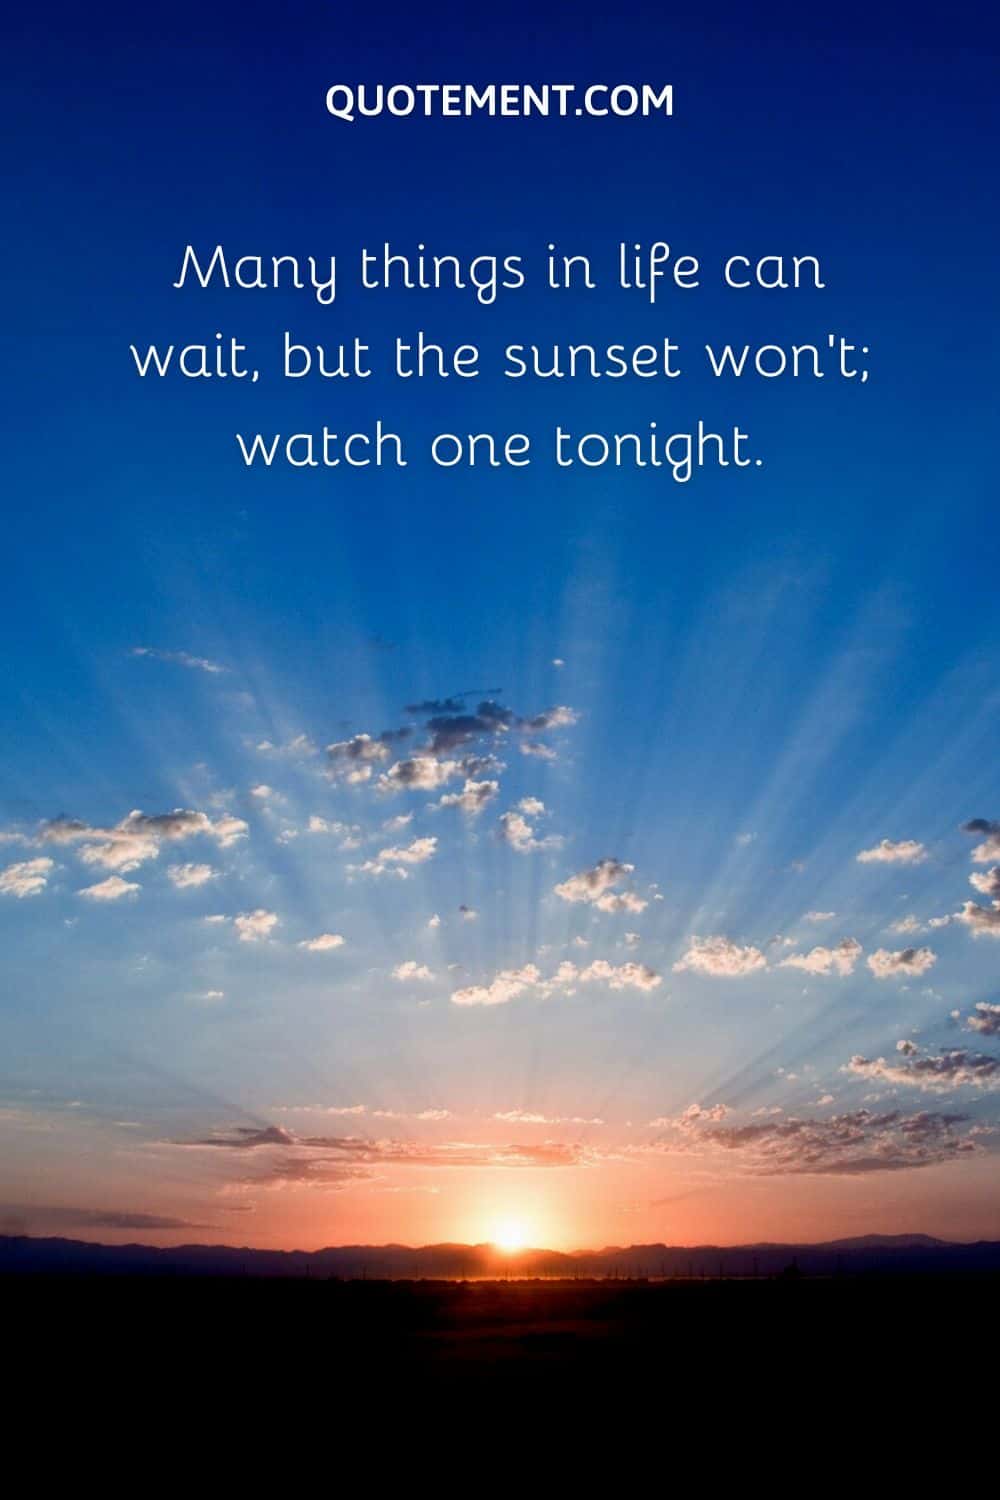 Many things in life can wait, but the sunset won’t; watch one tonight.